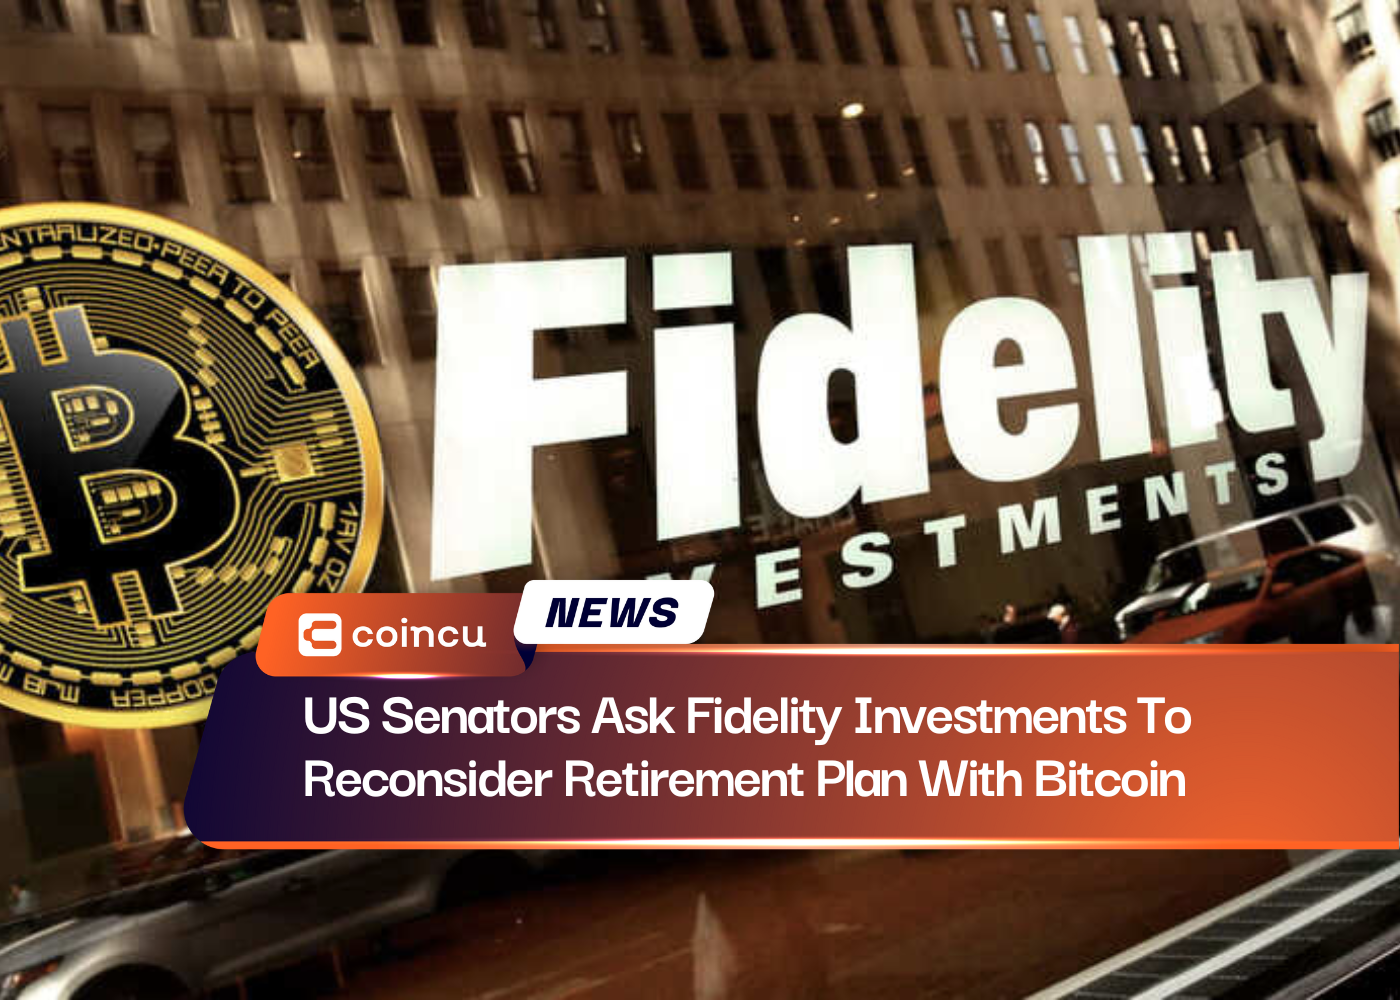 US Senators Ask Fidelity Investments To Reconsider Retirement Plan With Bitcoin